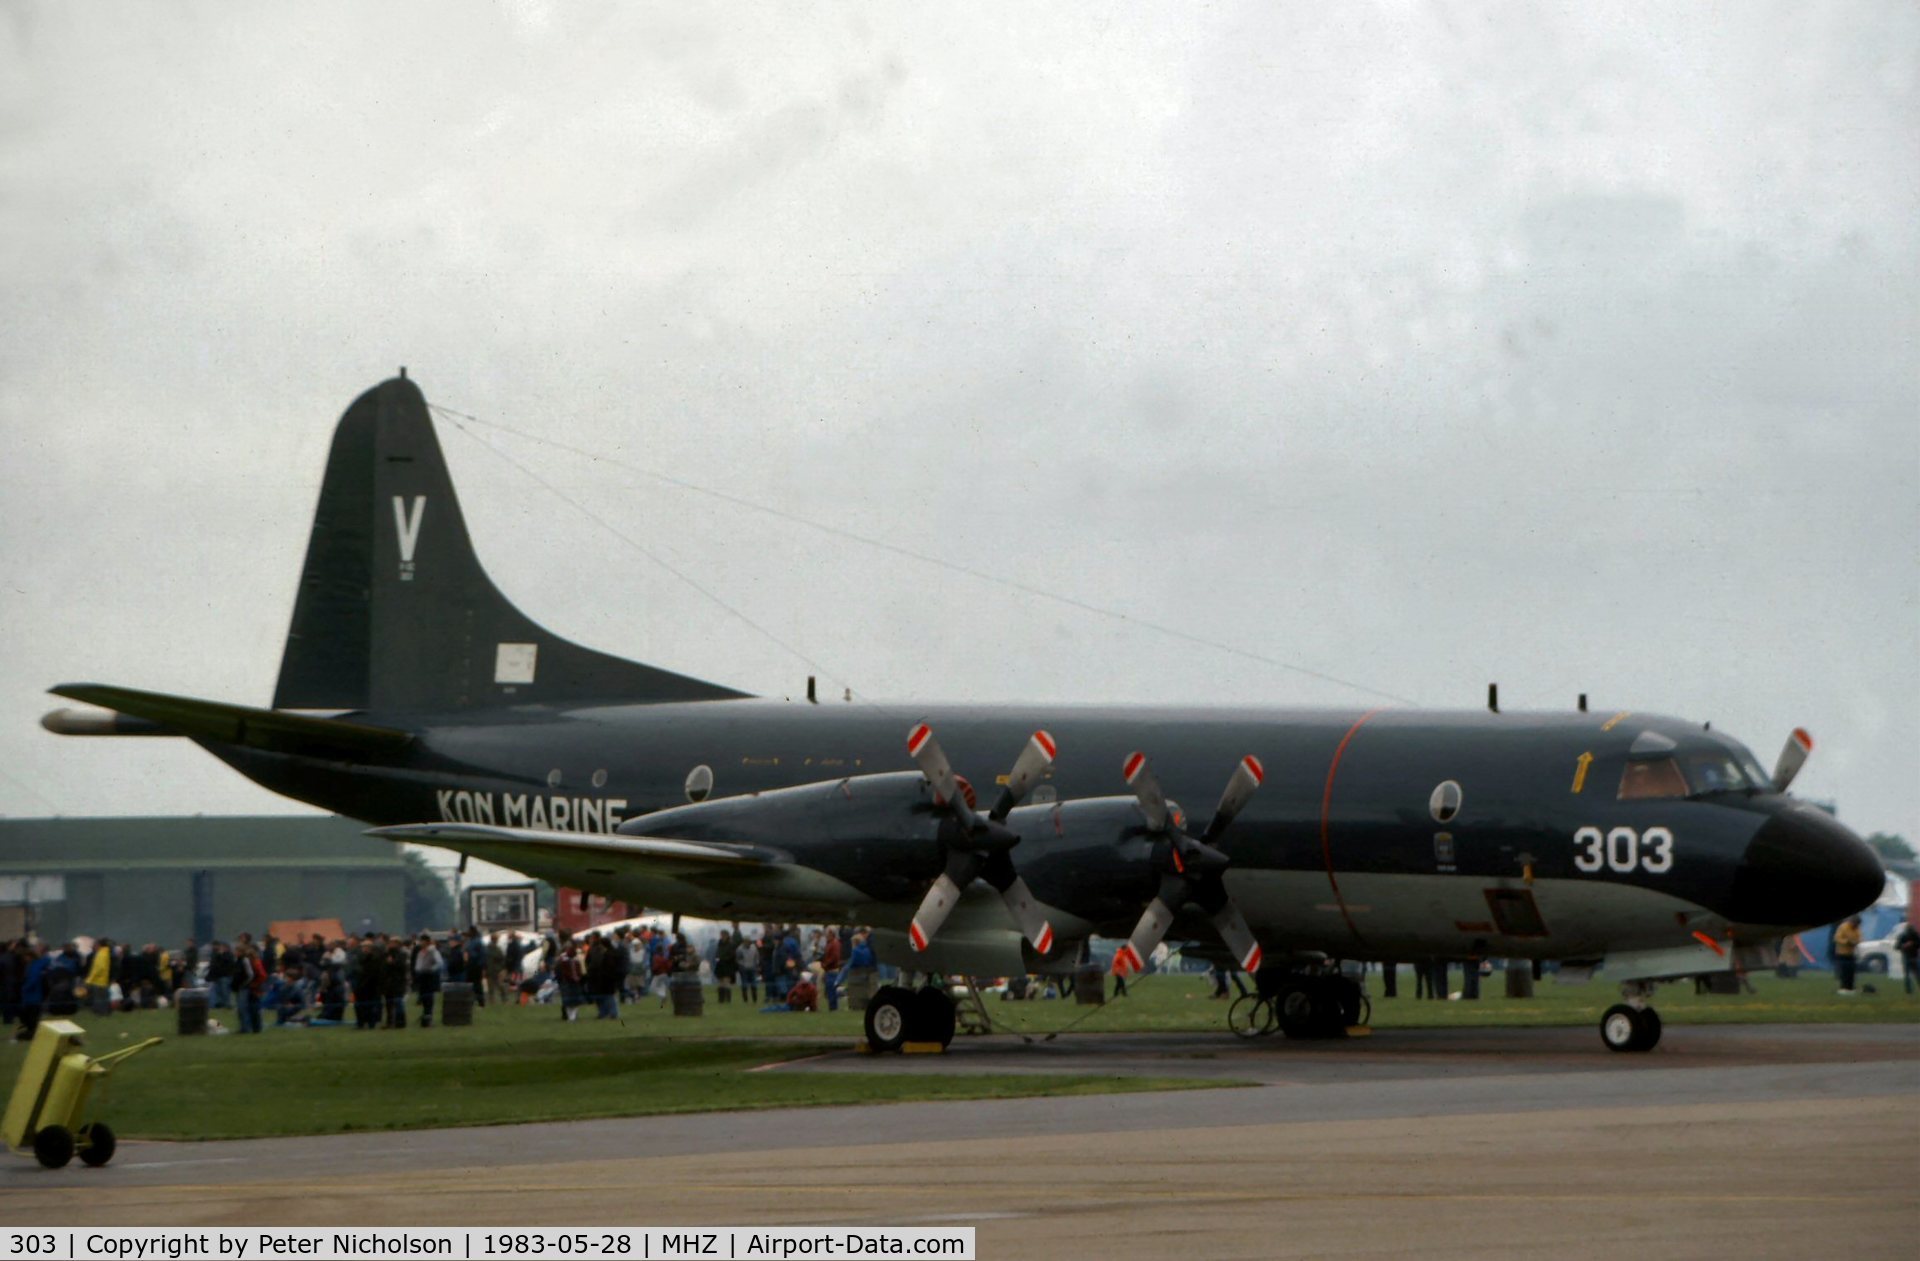 303, Lockheed P-3C Orion C/N 285E-5745, P-3C Orion of 320 Squadron Royal Netherlands Navy on display at the 1983 Mildenhall Air Fete.